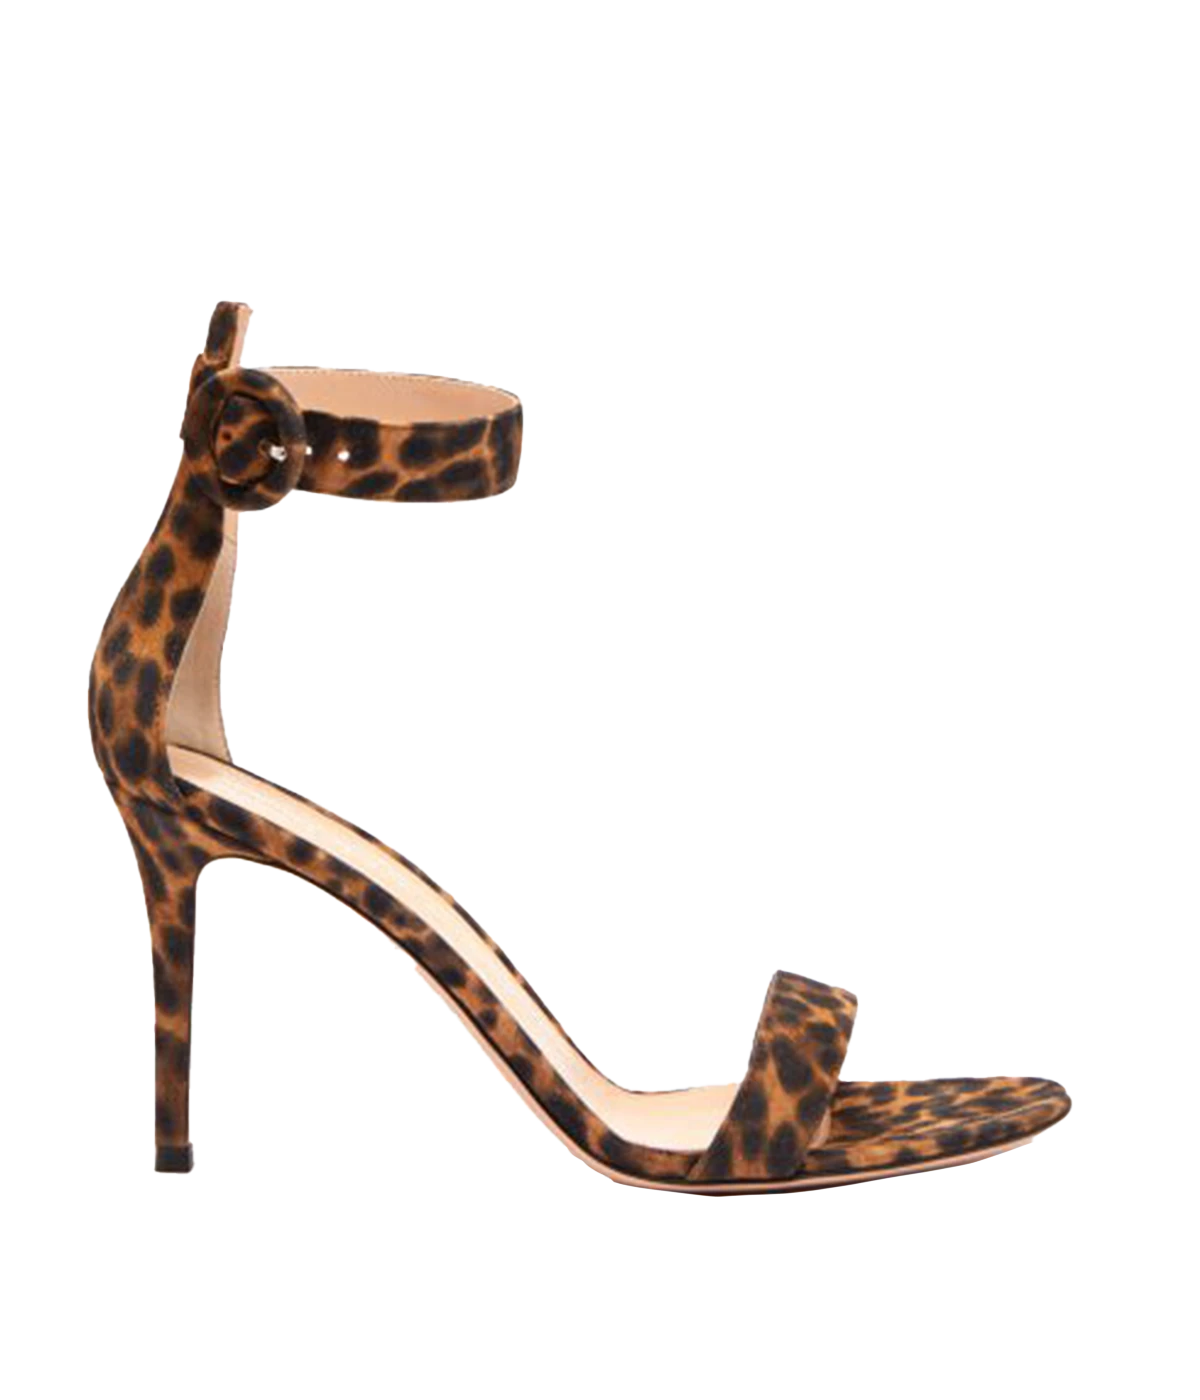 Image of a 85mm heeled sandal, featuring a leopard print, ankle and tie strap with ankle backing support.  